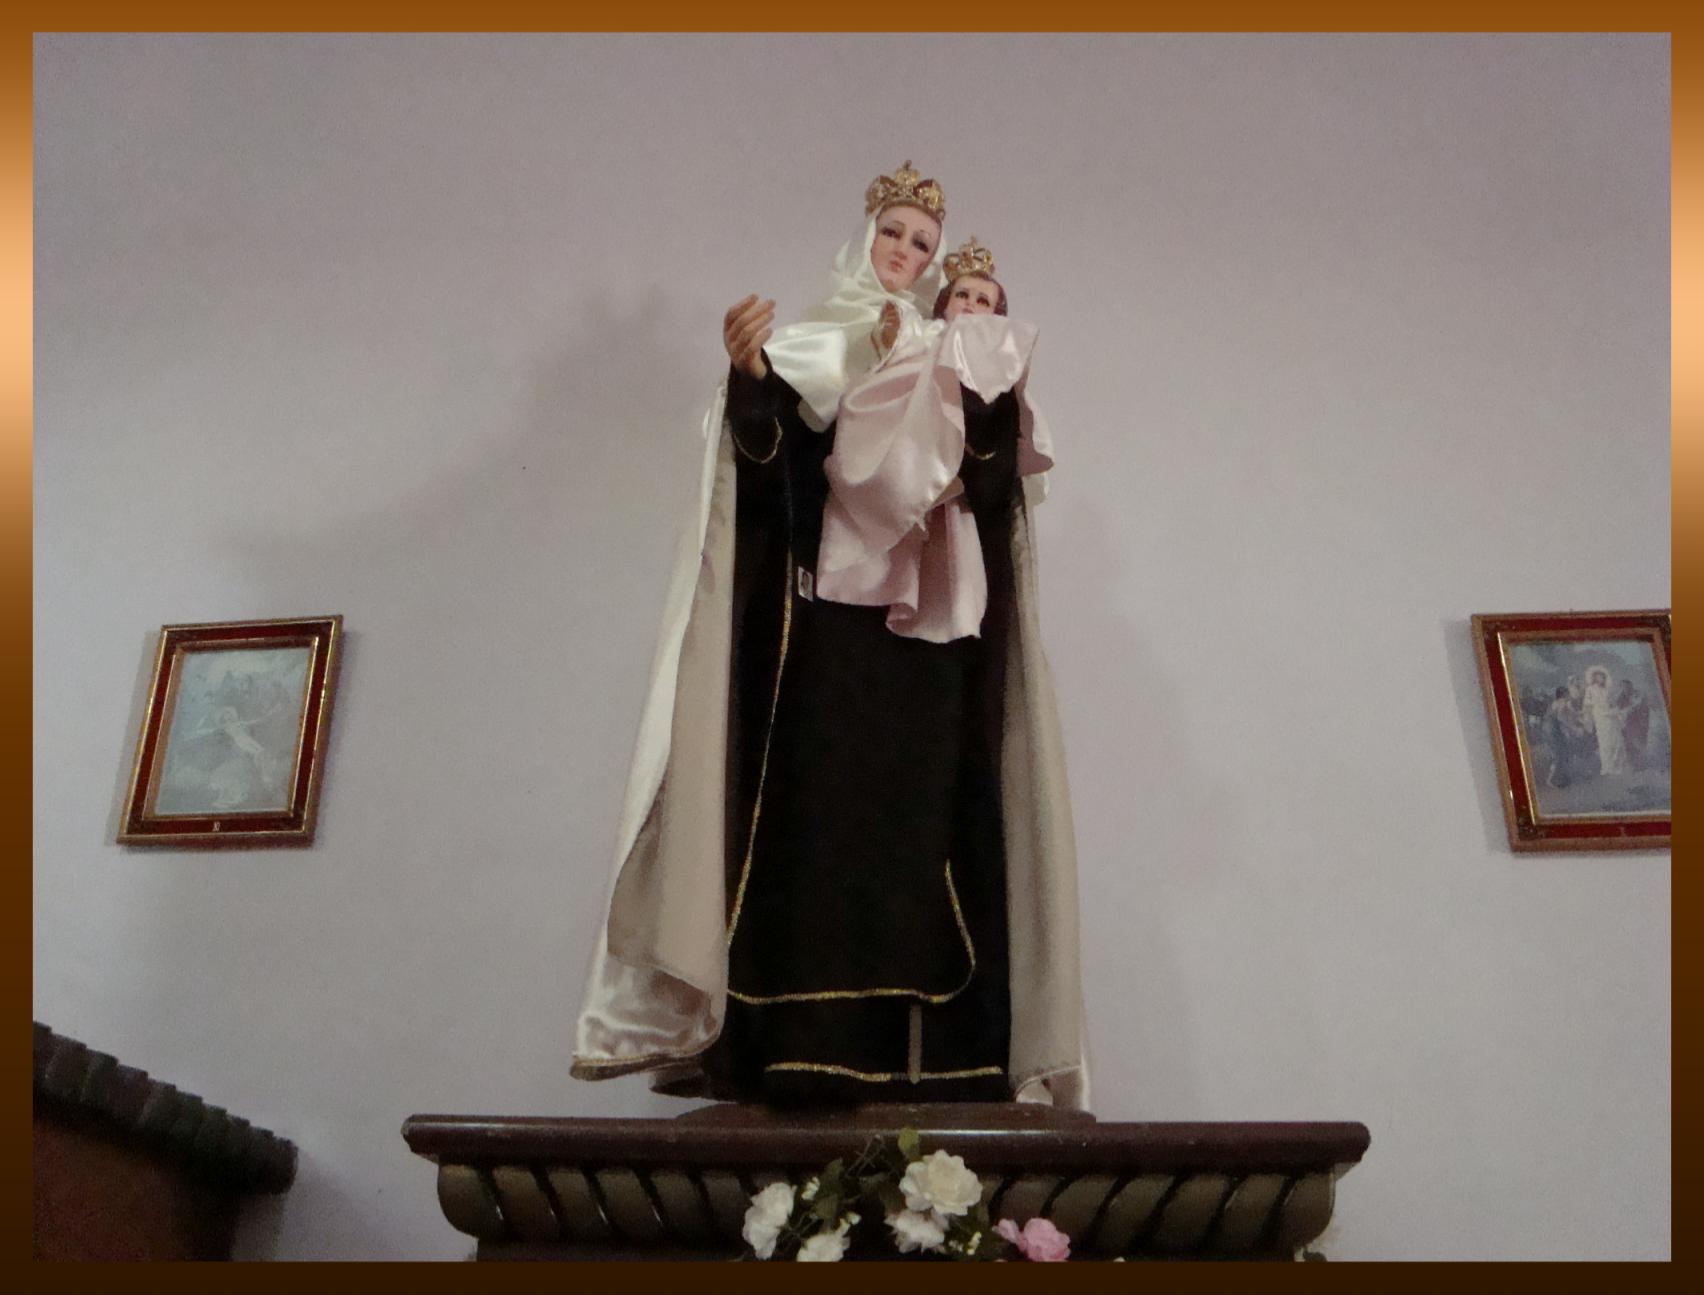 this is an image of a statue of st mary and baby jesus